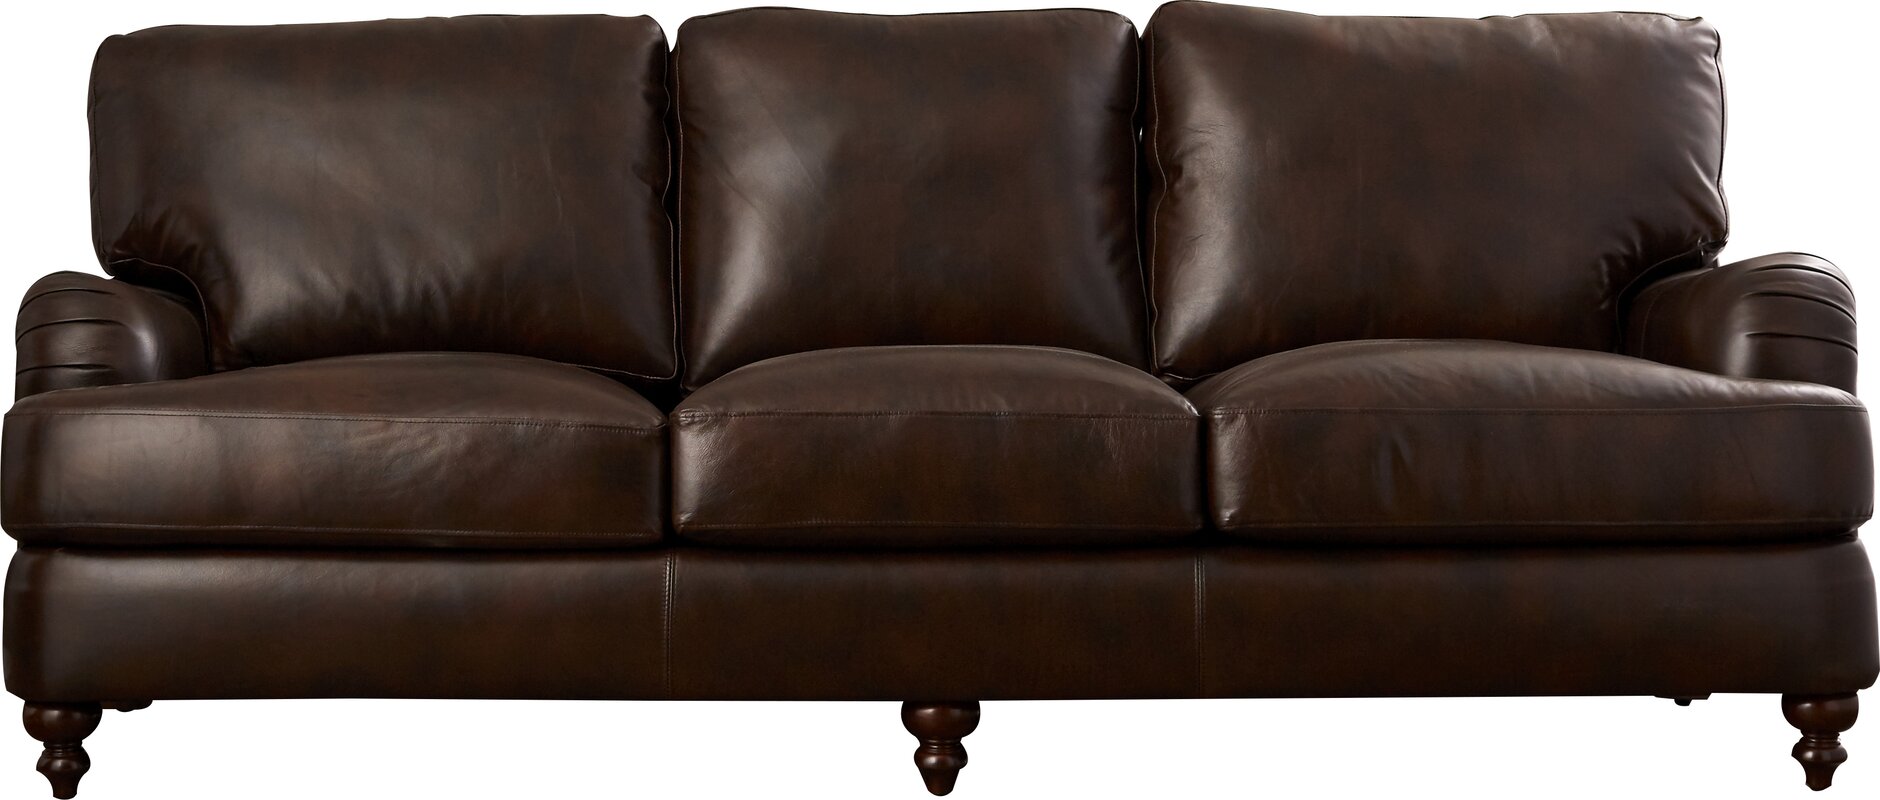 darby home leather sofa